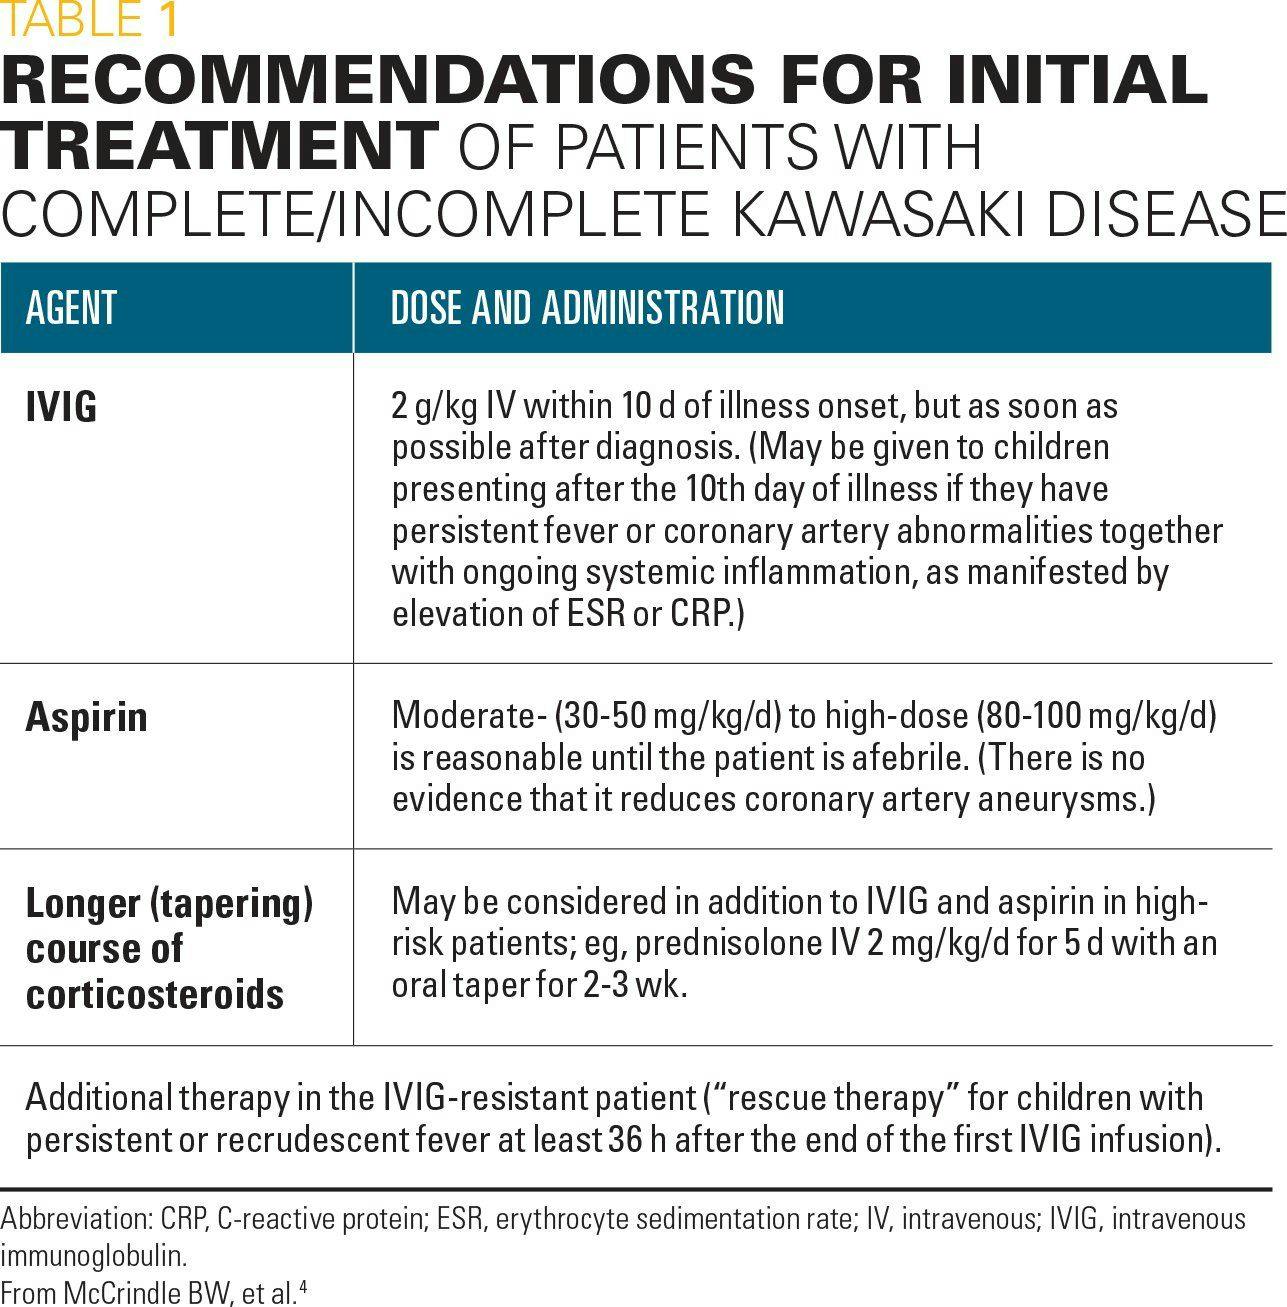 Recommendations for initial treatment of patients with complete/incomplete Kawasaki disease